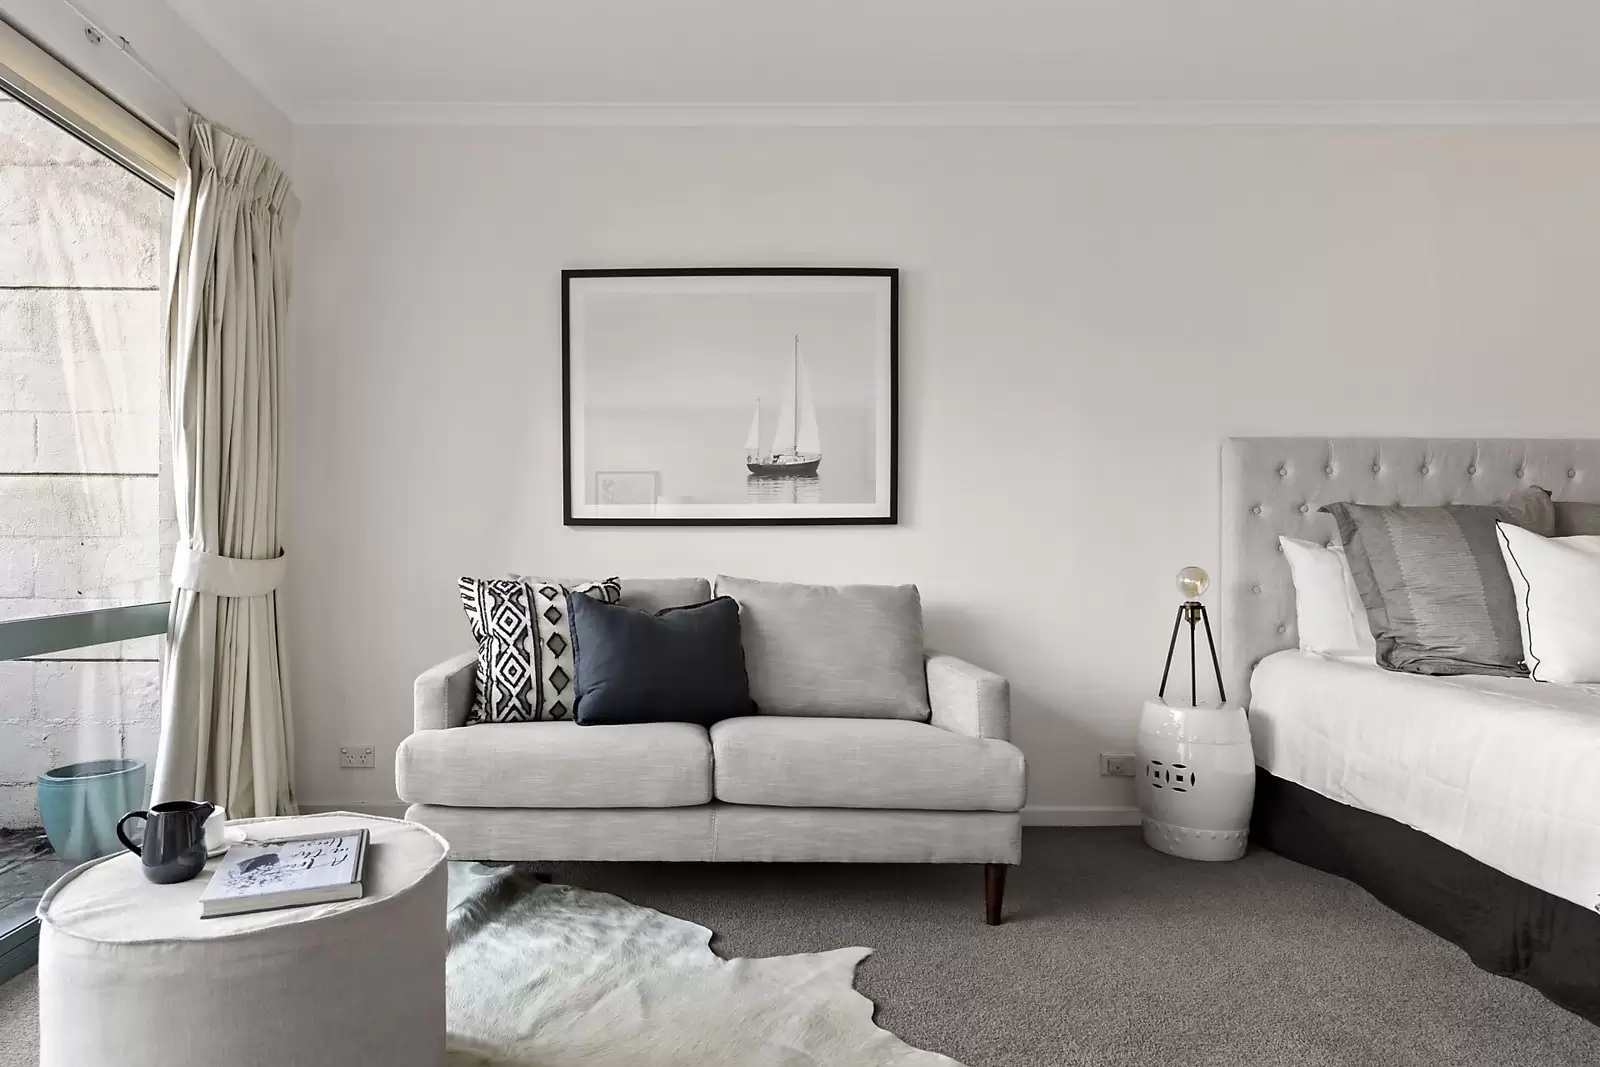 Photo #3: 100/155 Missenden Road, Newtown - Sold by Sydney Sotheby's International Realty